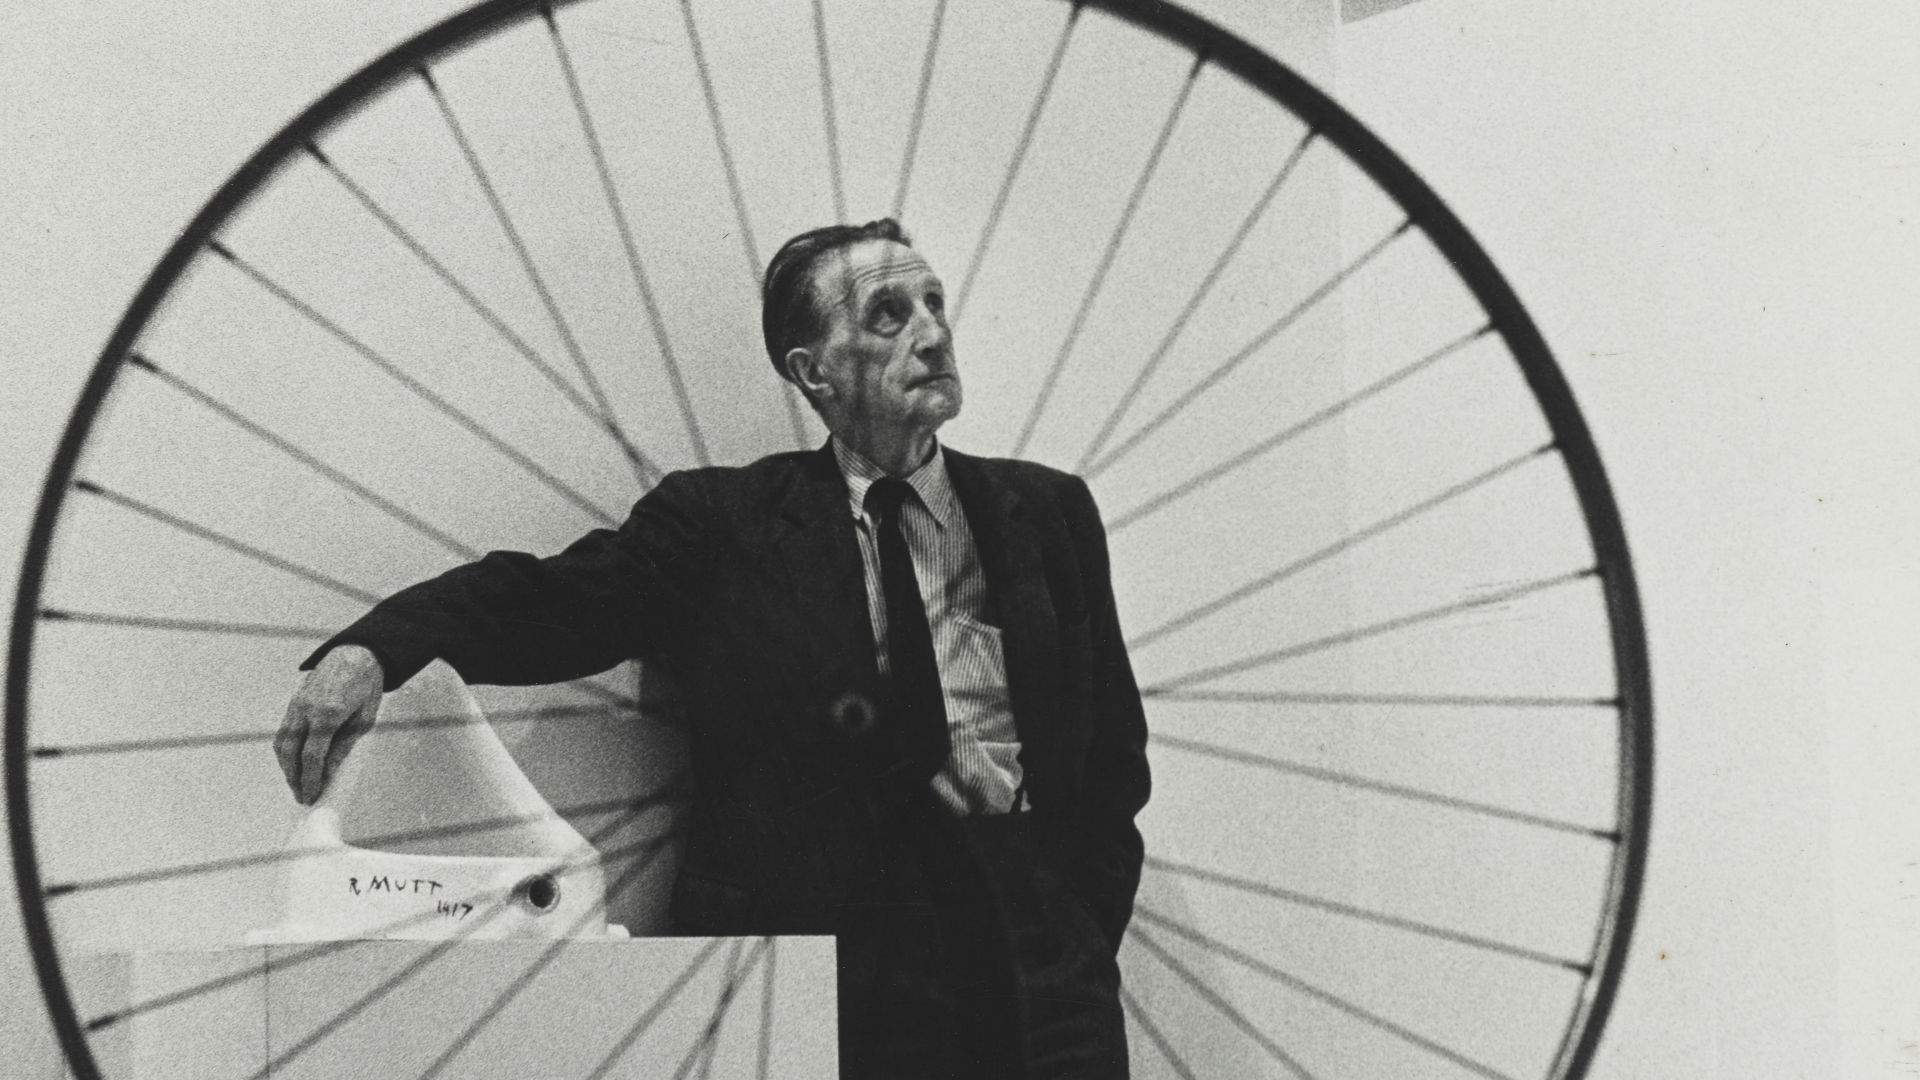 Everything You Need to Know About Marcel Duchamp Before Seeing the AGNSW's Huge Survey of His Work